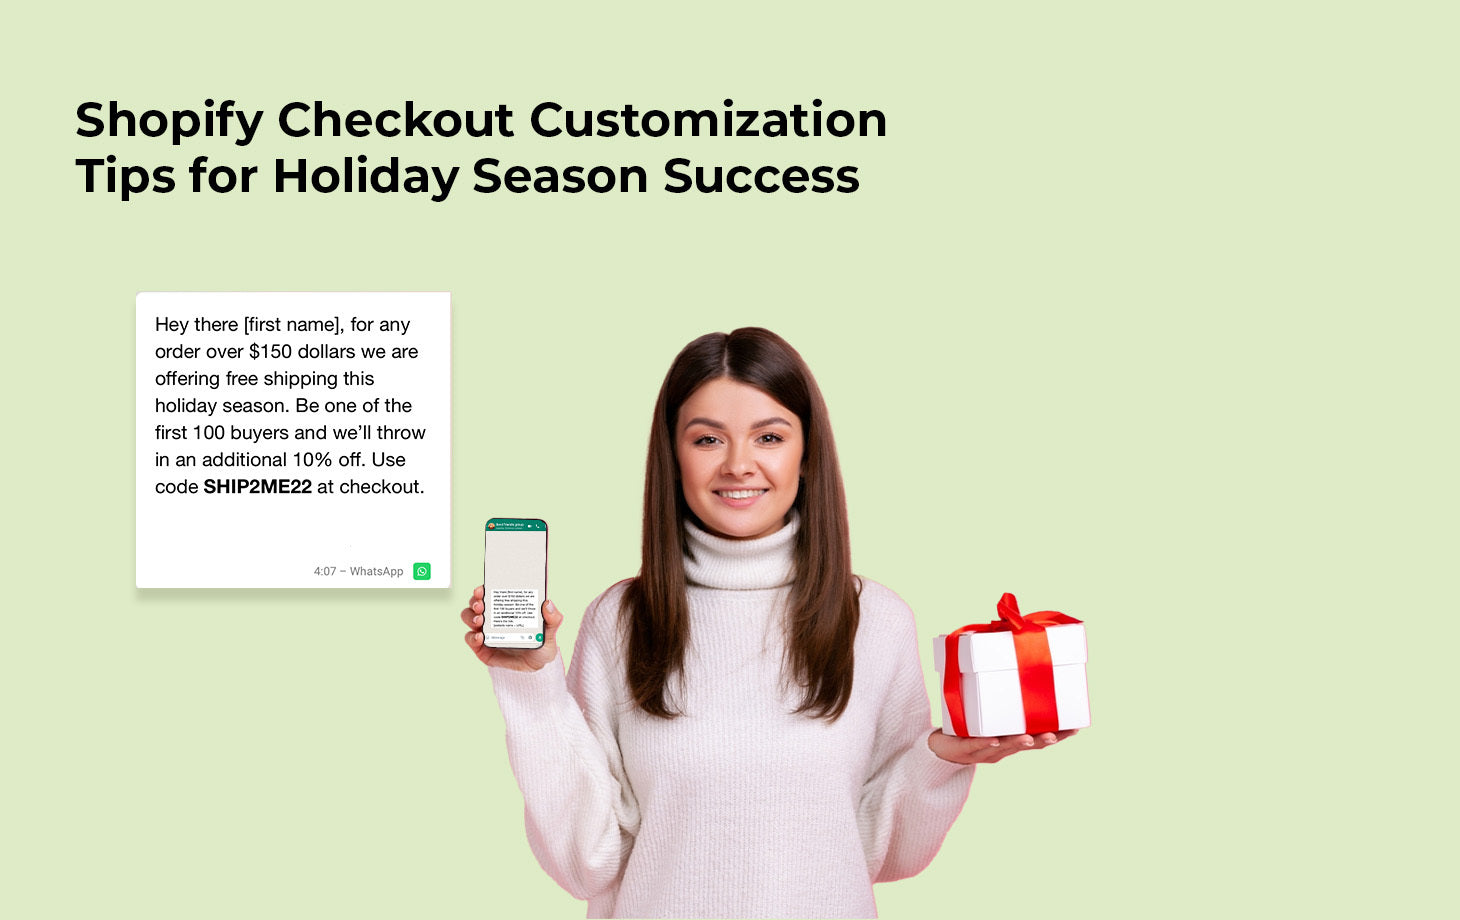 Shopify Checkout Customization Tips for Holiday Season Success